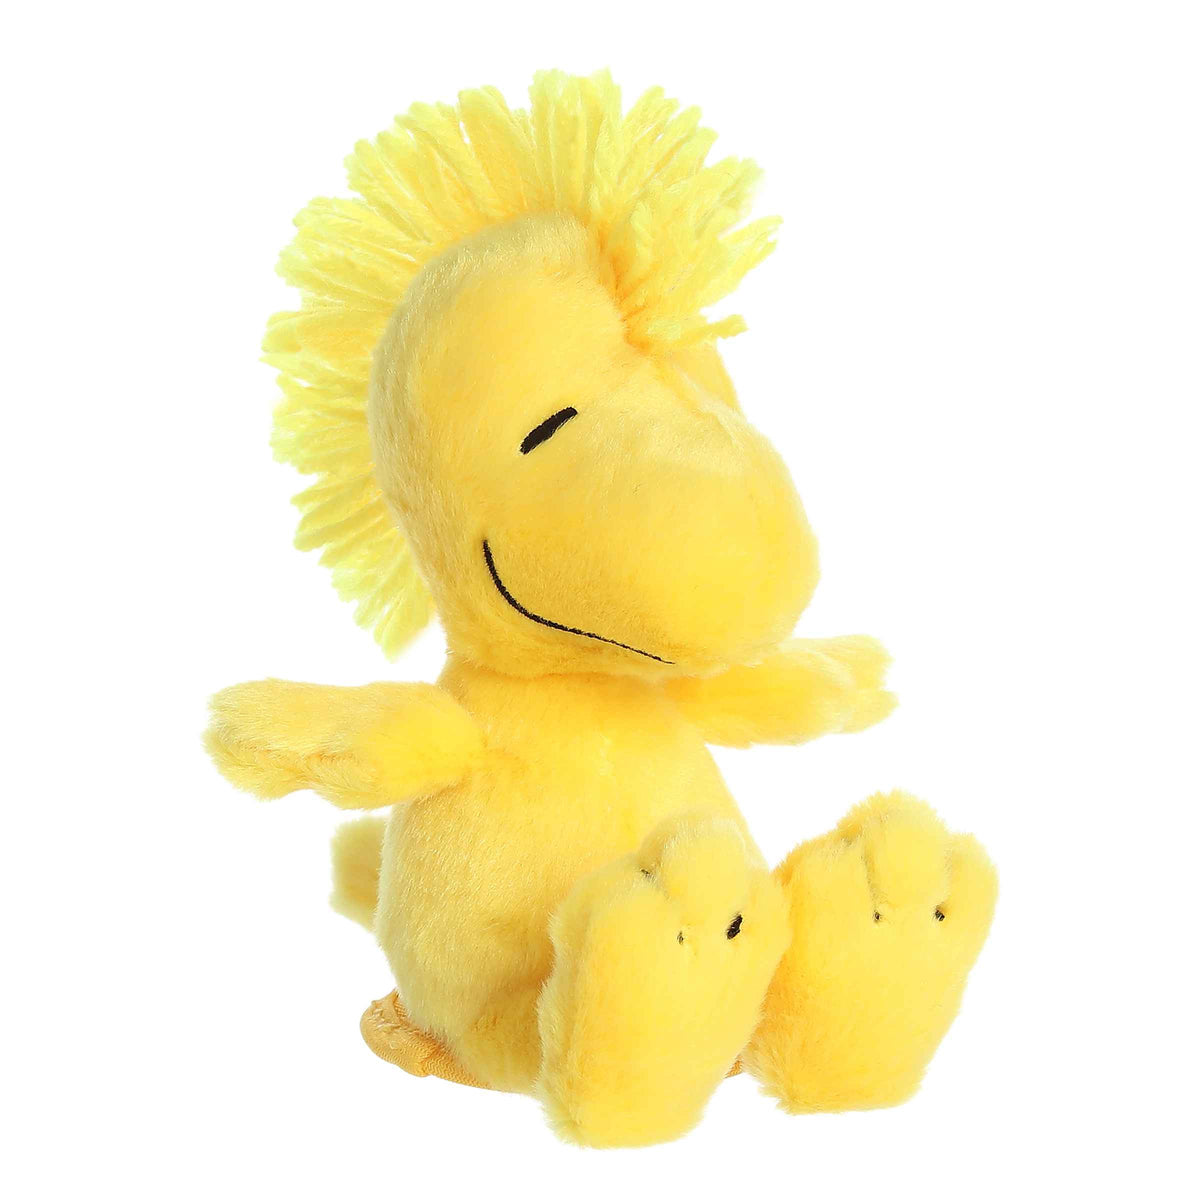 Woodstock Shoulderkins, soft plush with hidden magnet, perches on shoulder for secure, playful companionship from Peanuts